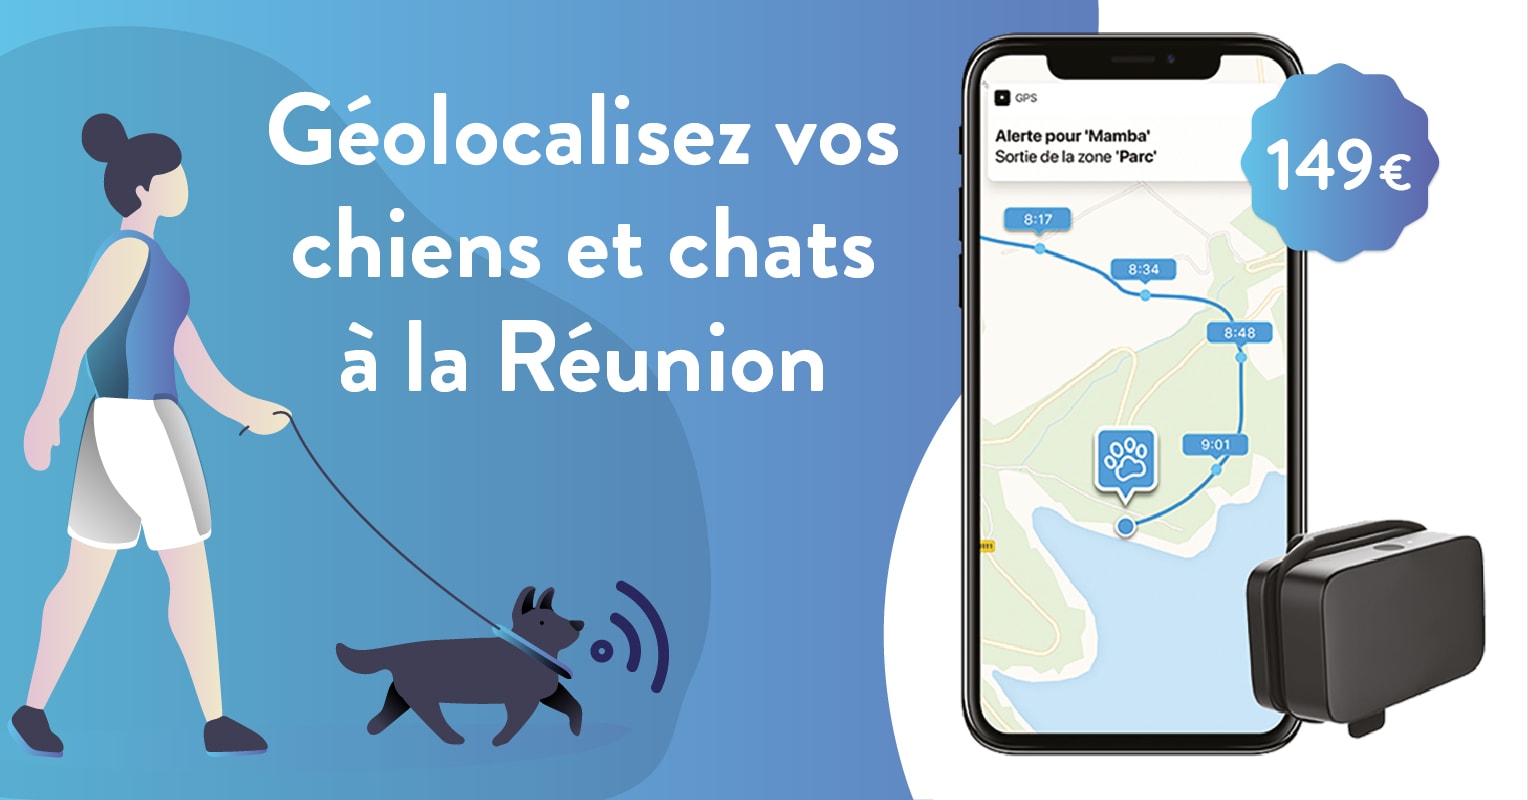 Mini Traceur GPS Animaux, GPS Chien, Traceur GPS Chien Chat Animal